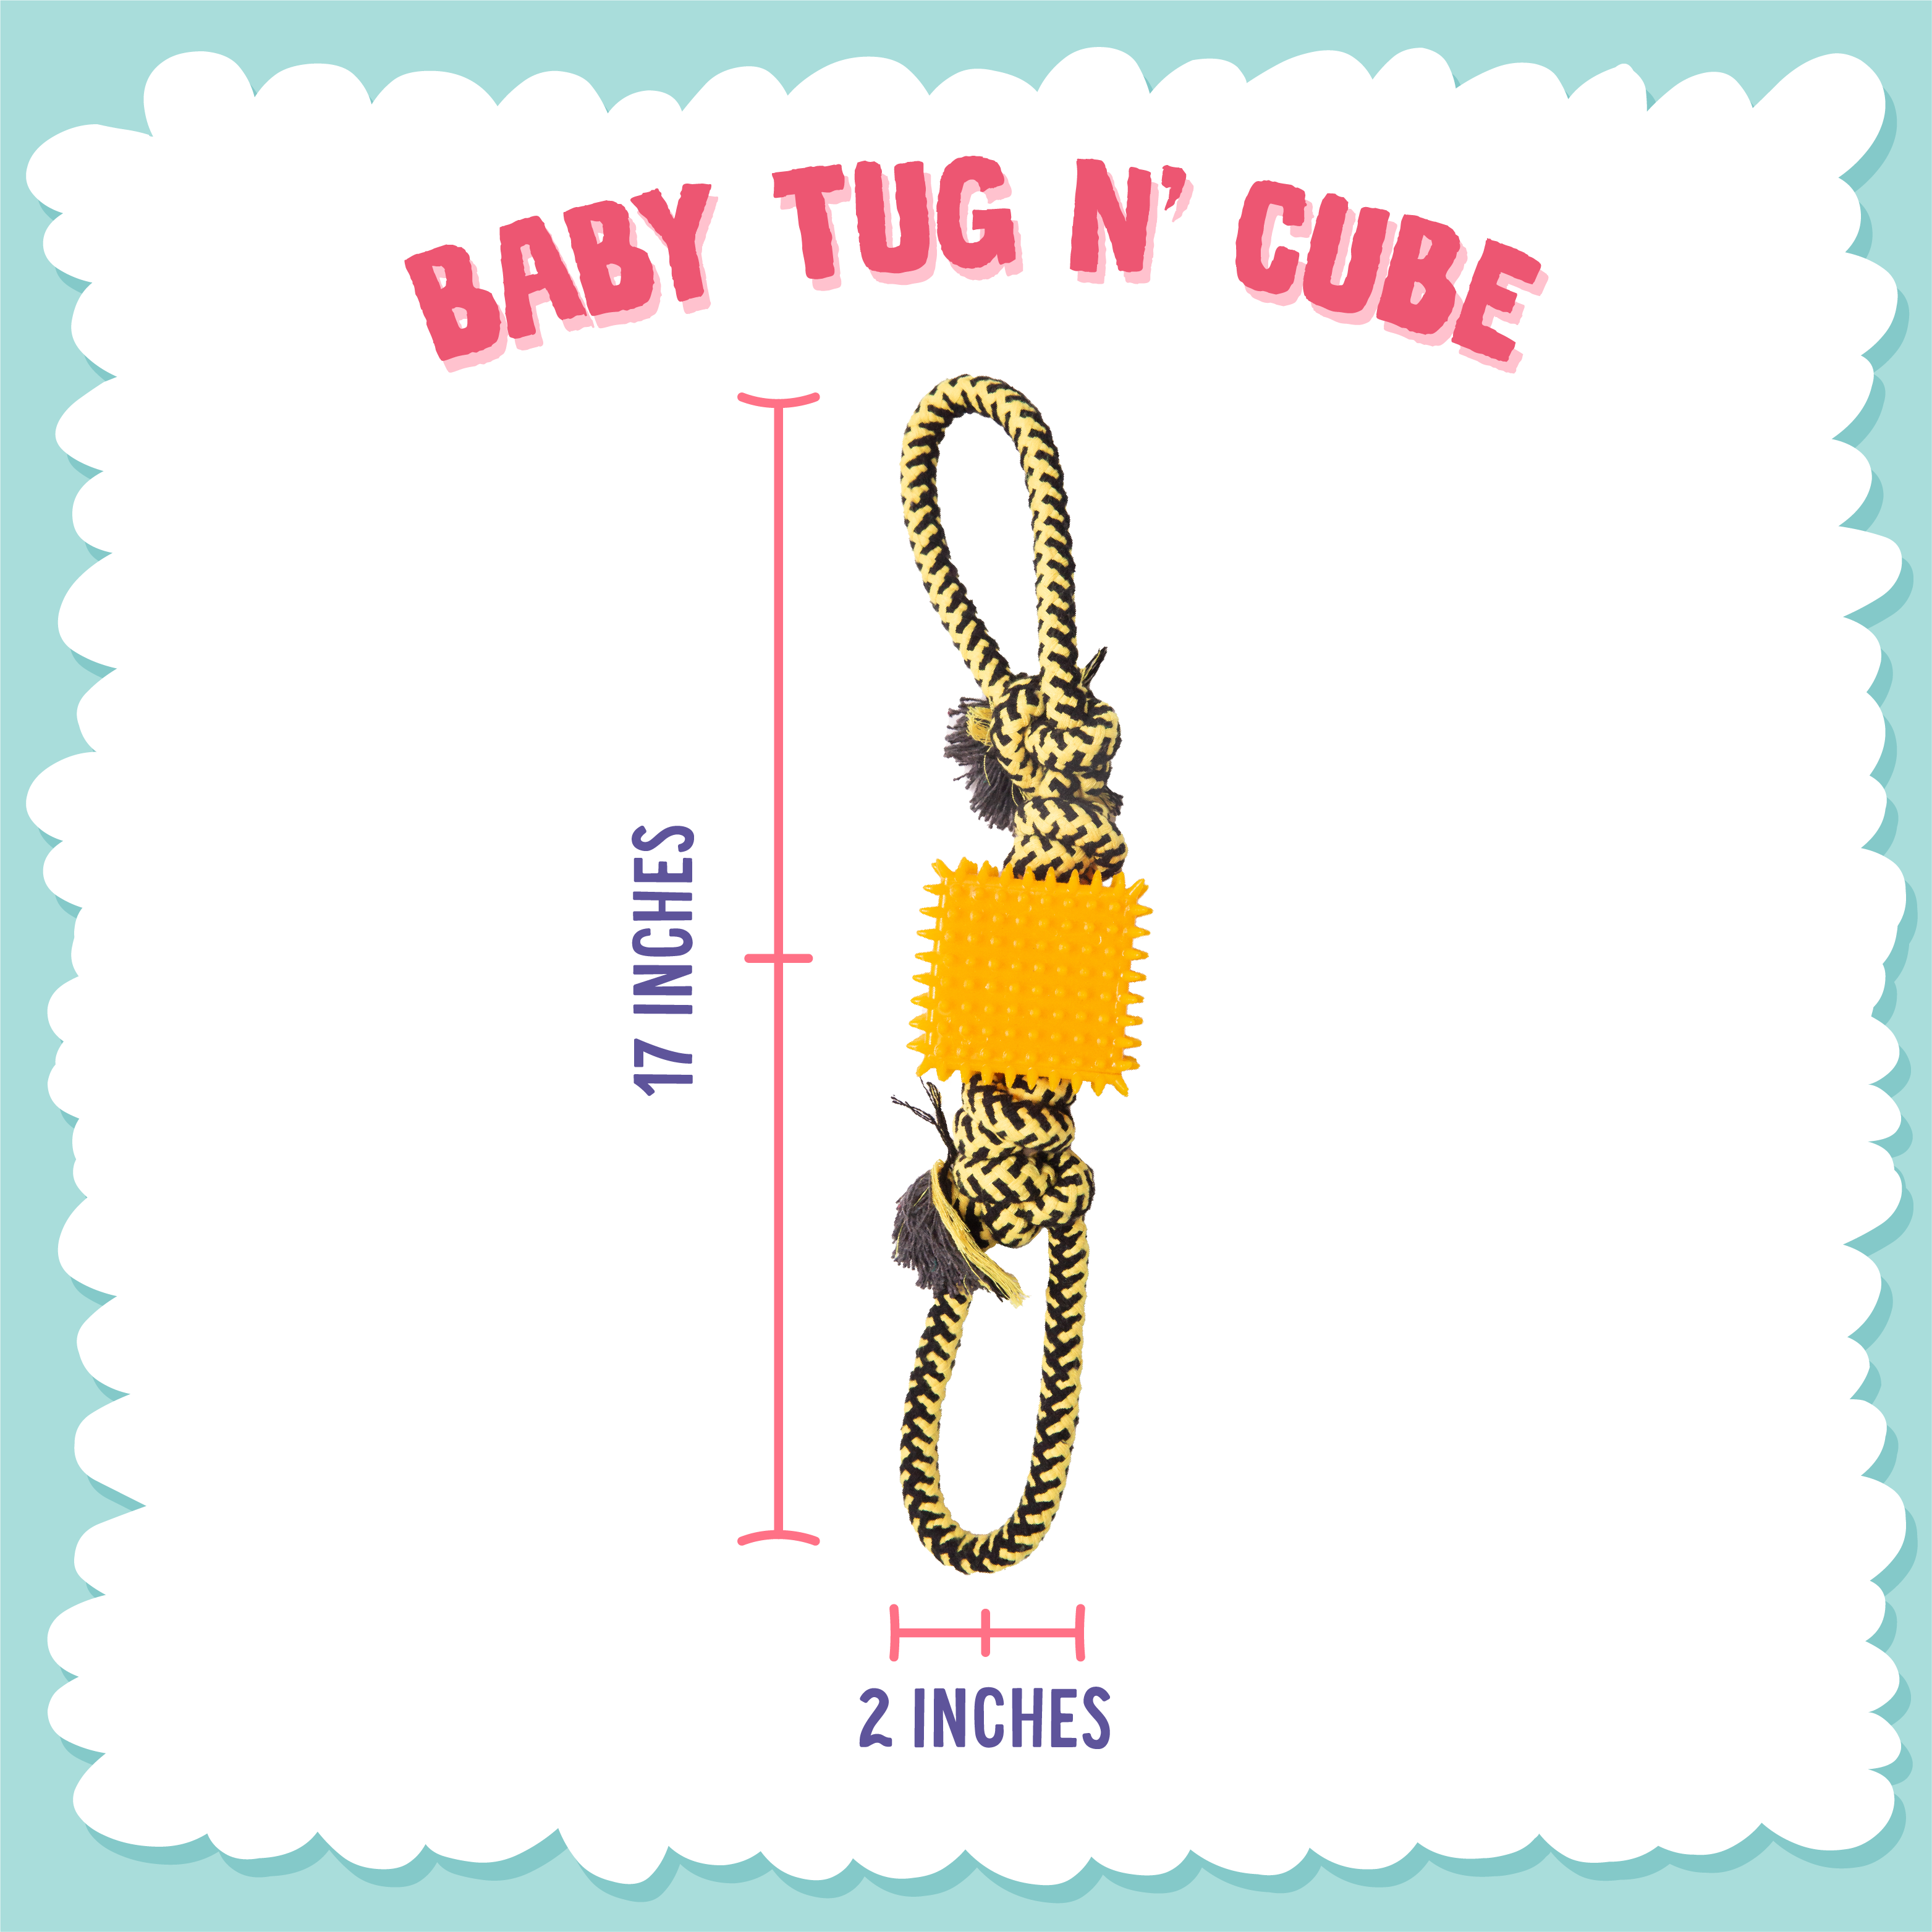 Baby Tug N Cube (Assorted Colors) - 16"